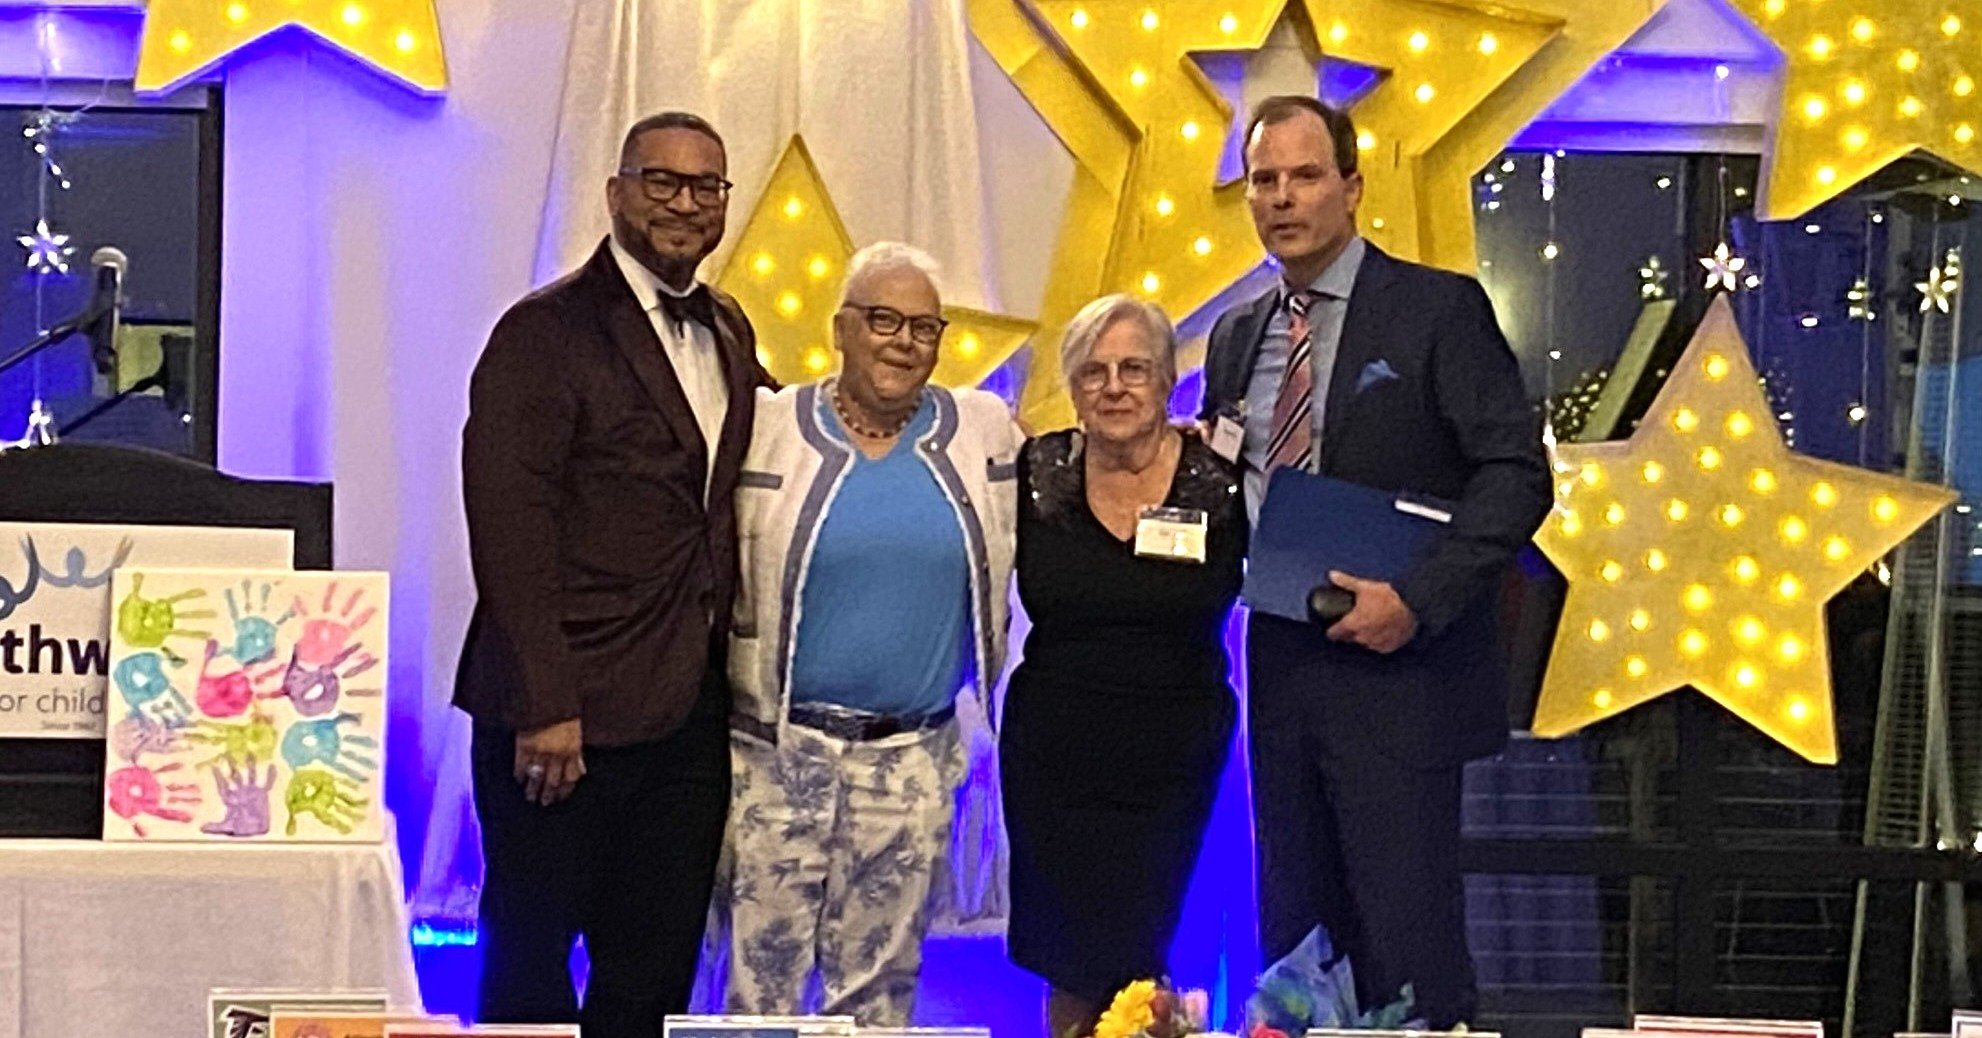 🎉✨ Thank you to everyone who joined us at the Pathways for Children Let's Have a Ball Gala last Thursday! 🌟 Your generosity is paving the way for a better future for those in need. 

Congratulations to our Sue Todd Service Award recipients Ann-Marg